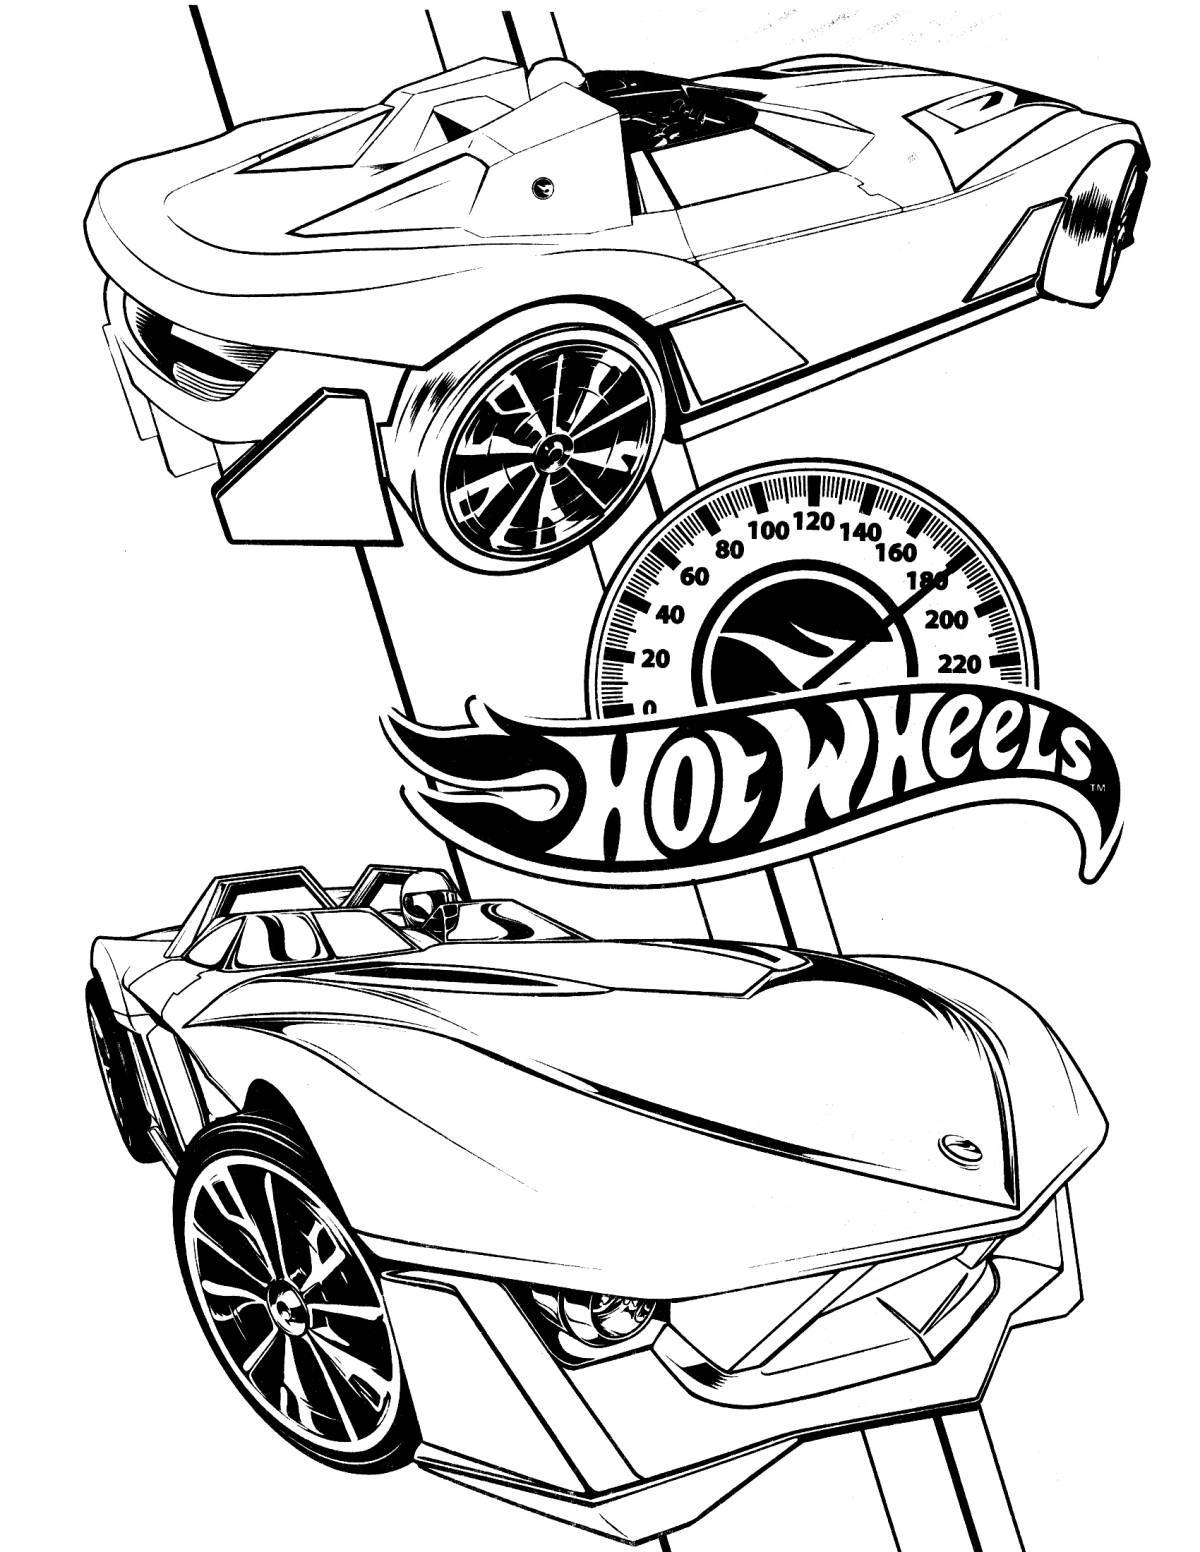 Fabulous hot wheels coloring pages for kids